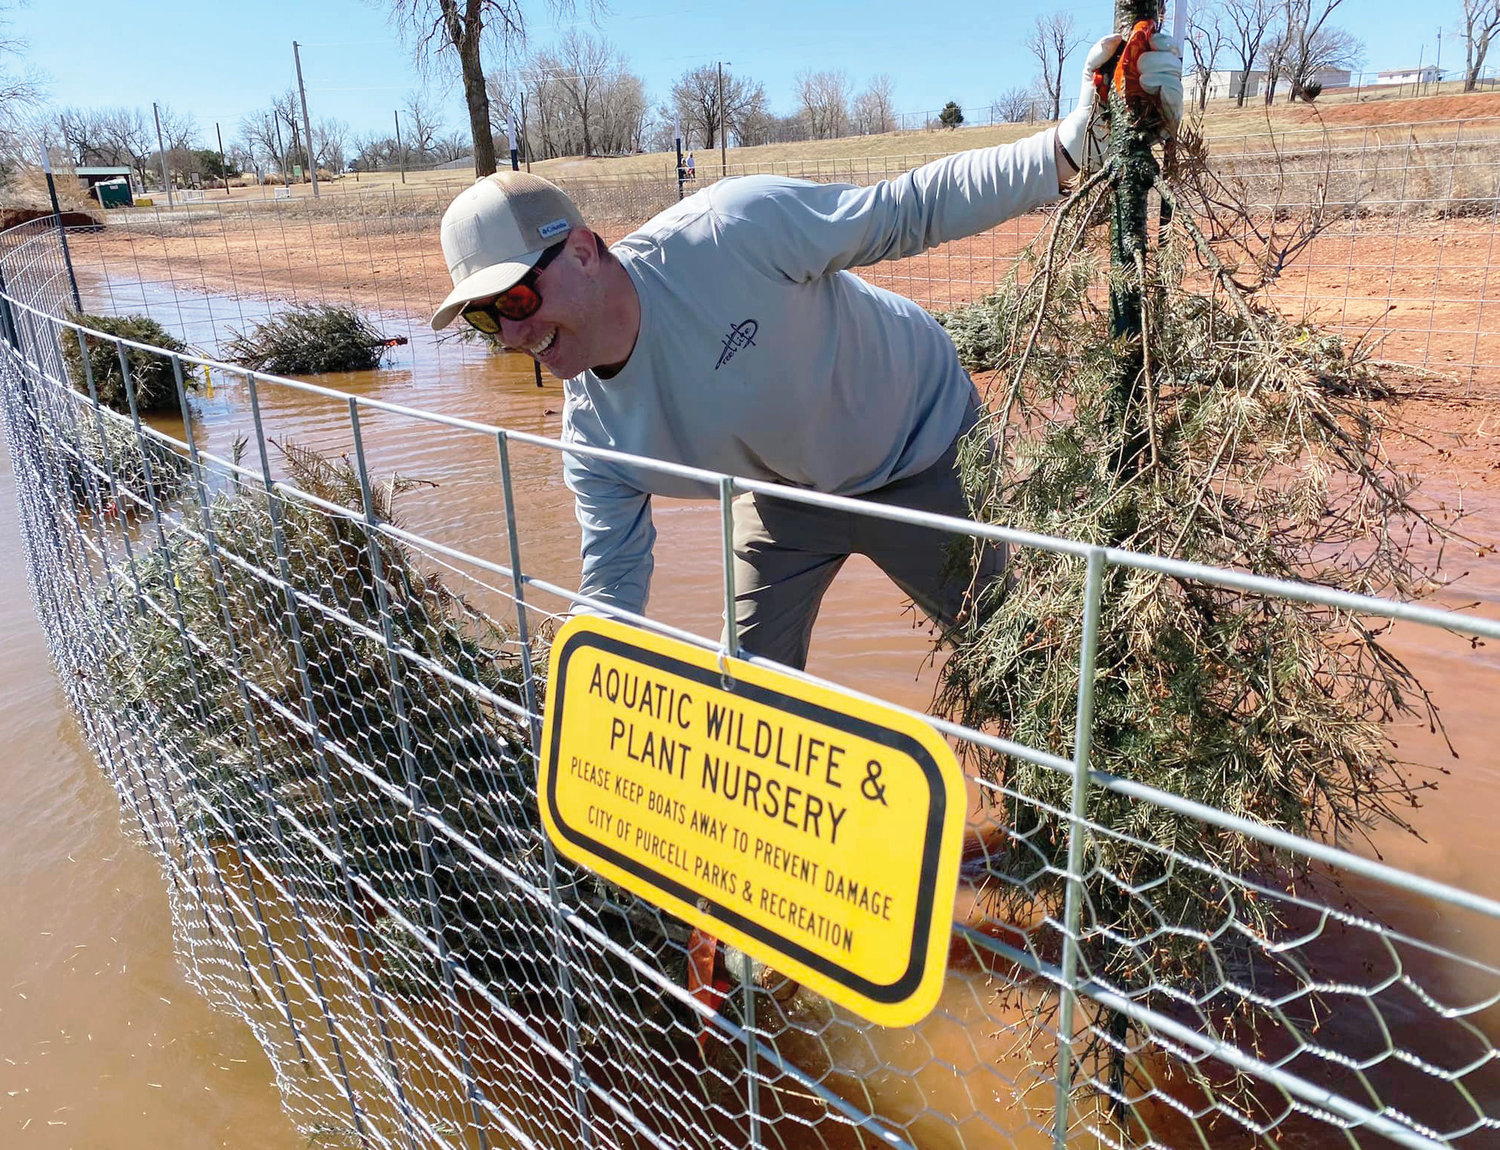 The Oklahoma Department of Wildlife Conservation cut nuisance cedar trees and used them to build new aquatic habitat for fish and wildlife at Purcell Lake.